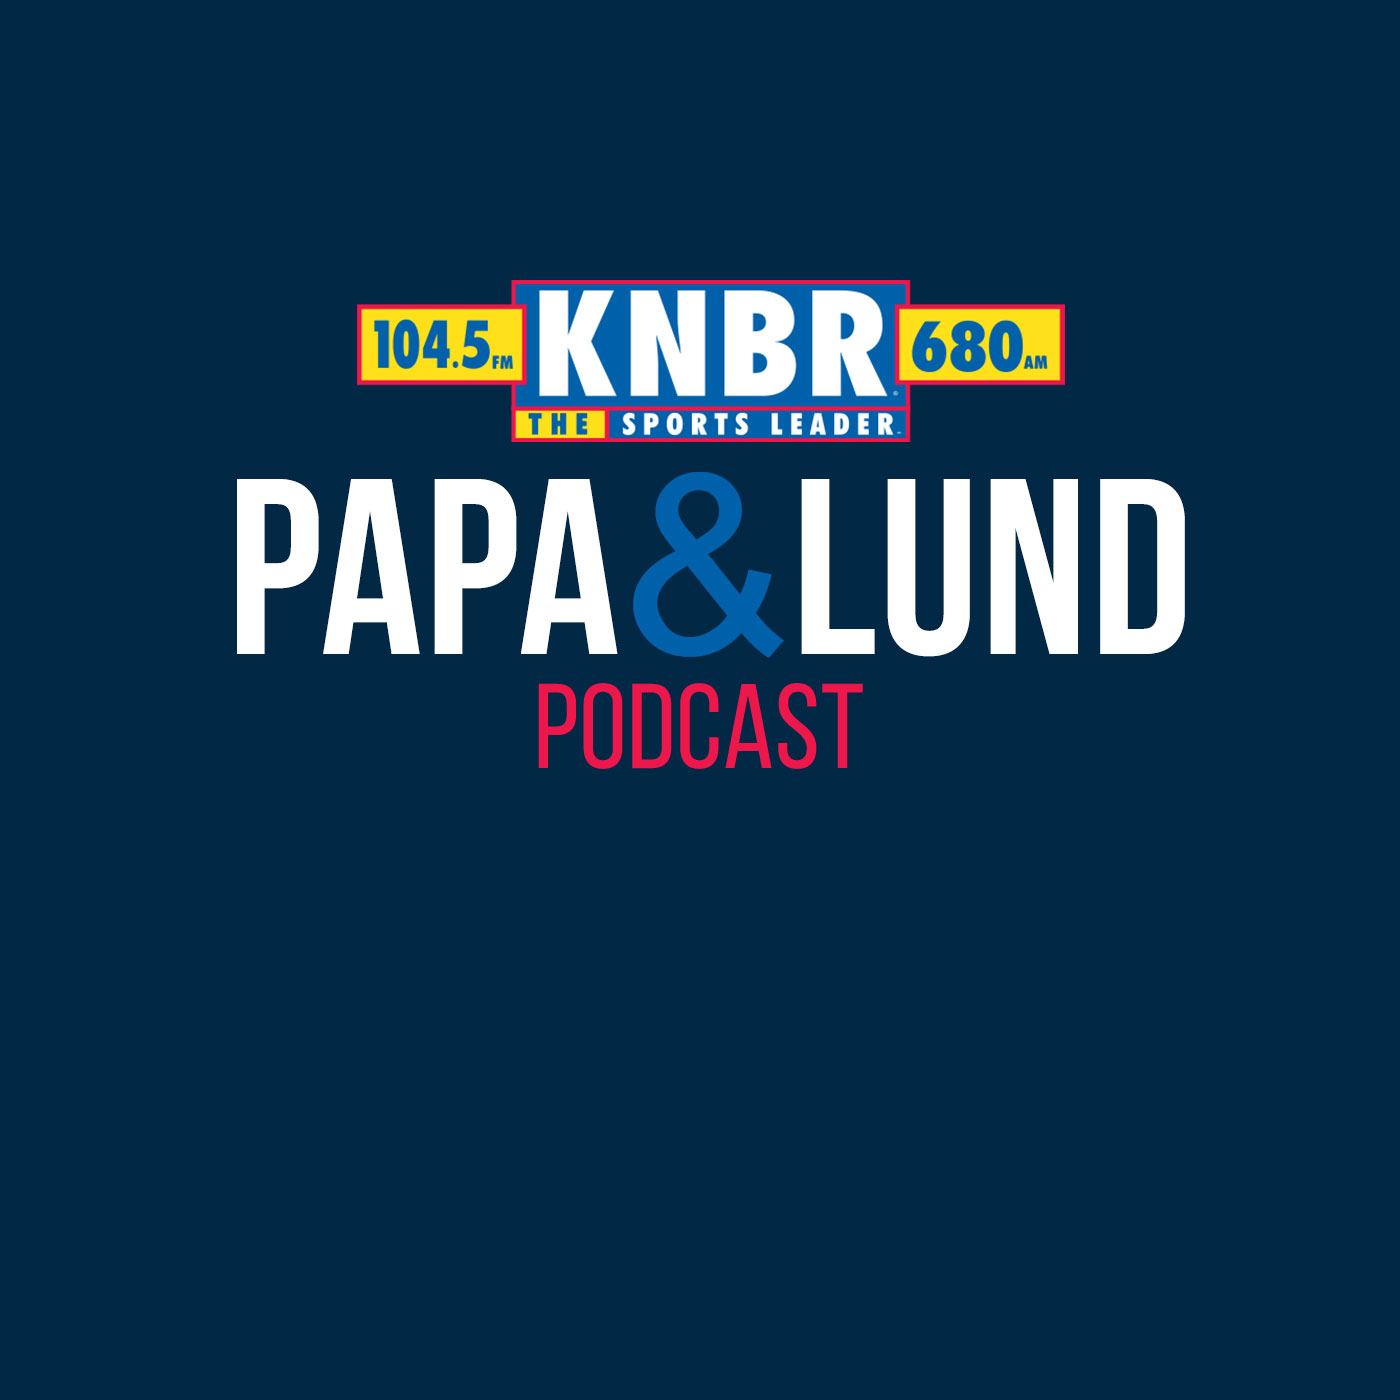 10-13 Andrew Siciliano joins Papa and Lund to discuss how the Cleveland Browns' roster shapes up against the 49ers with all the injuries they have faced and shares his view on Brock Purdy